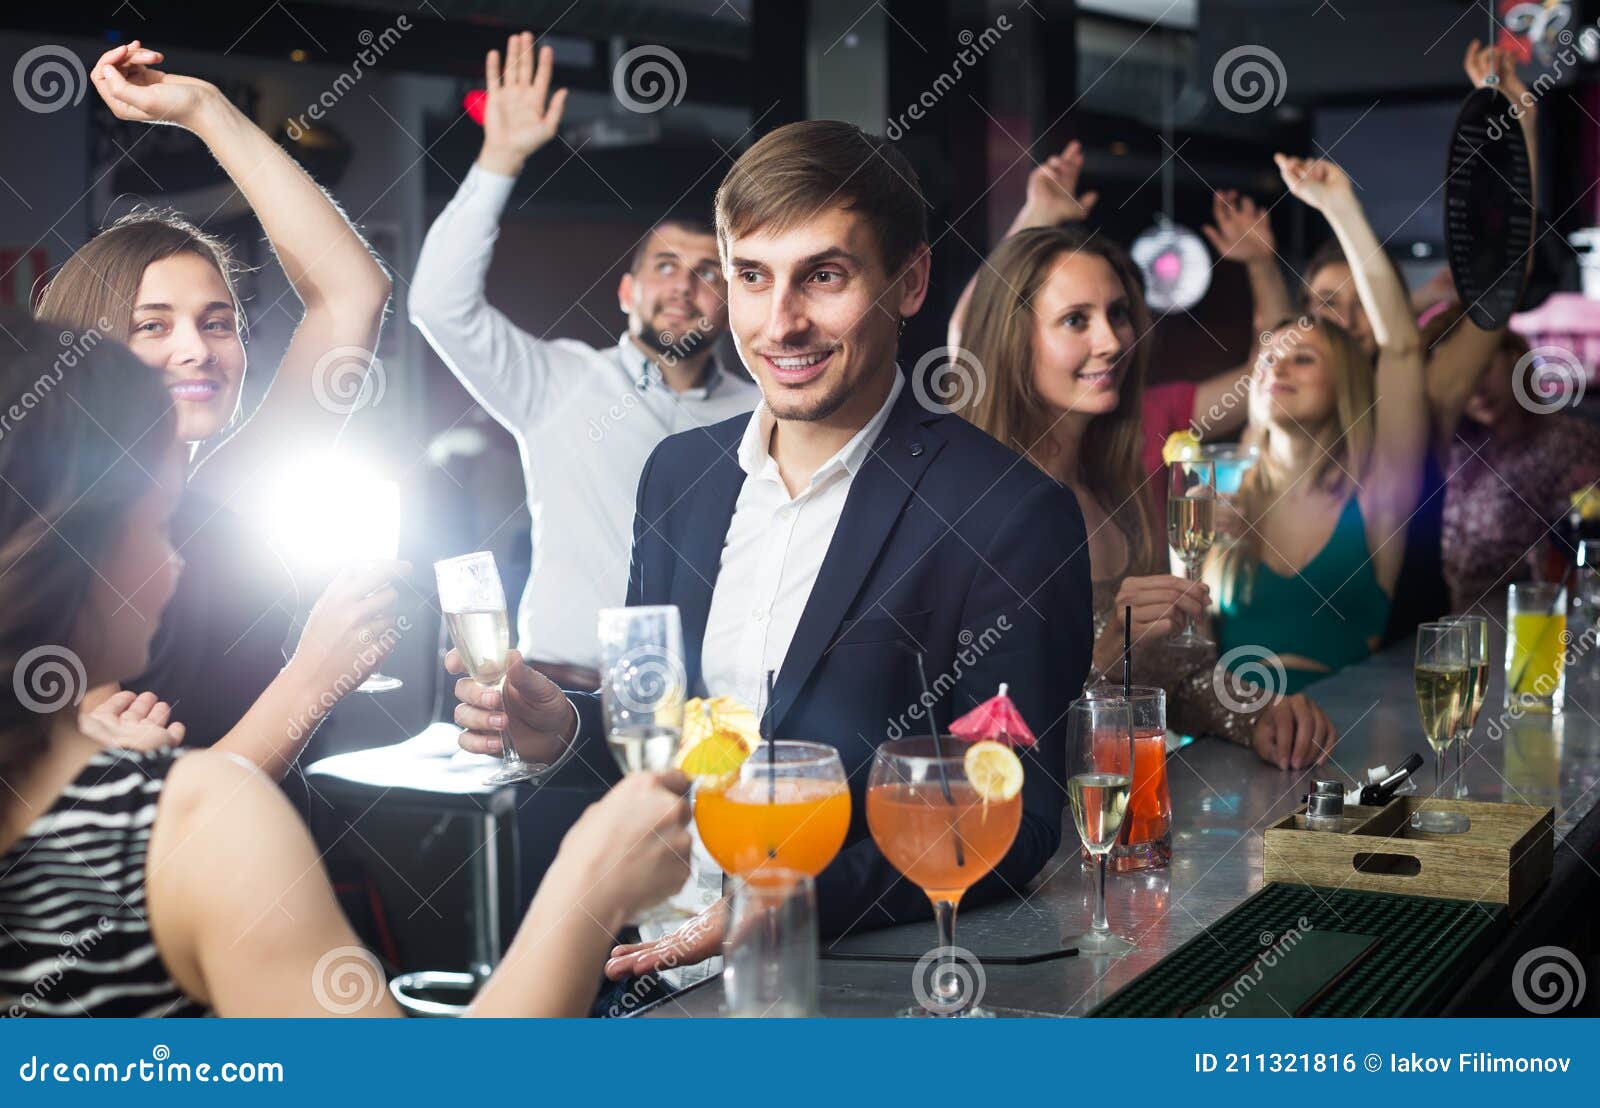 Men and Women are Dancing in a Restaurant Stock Photo - Image of event ...